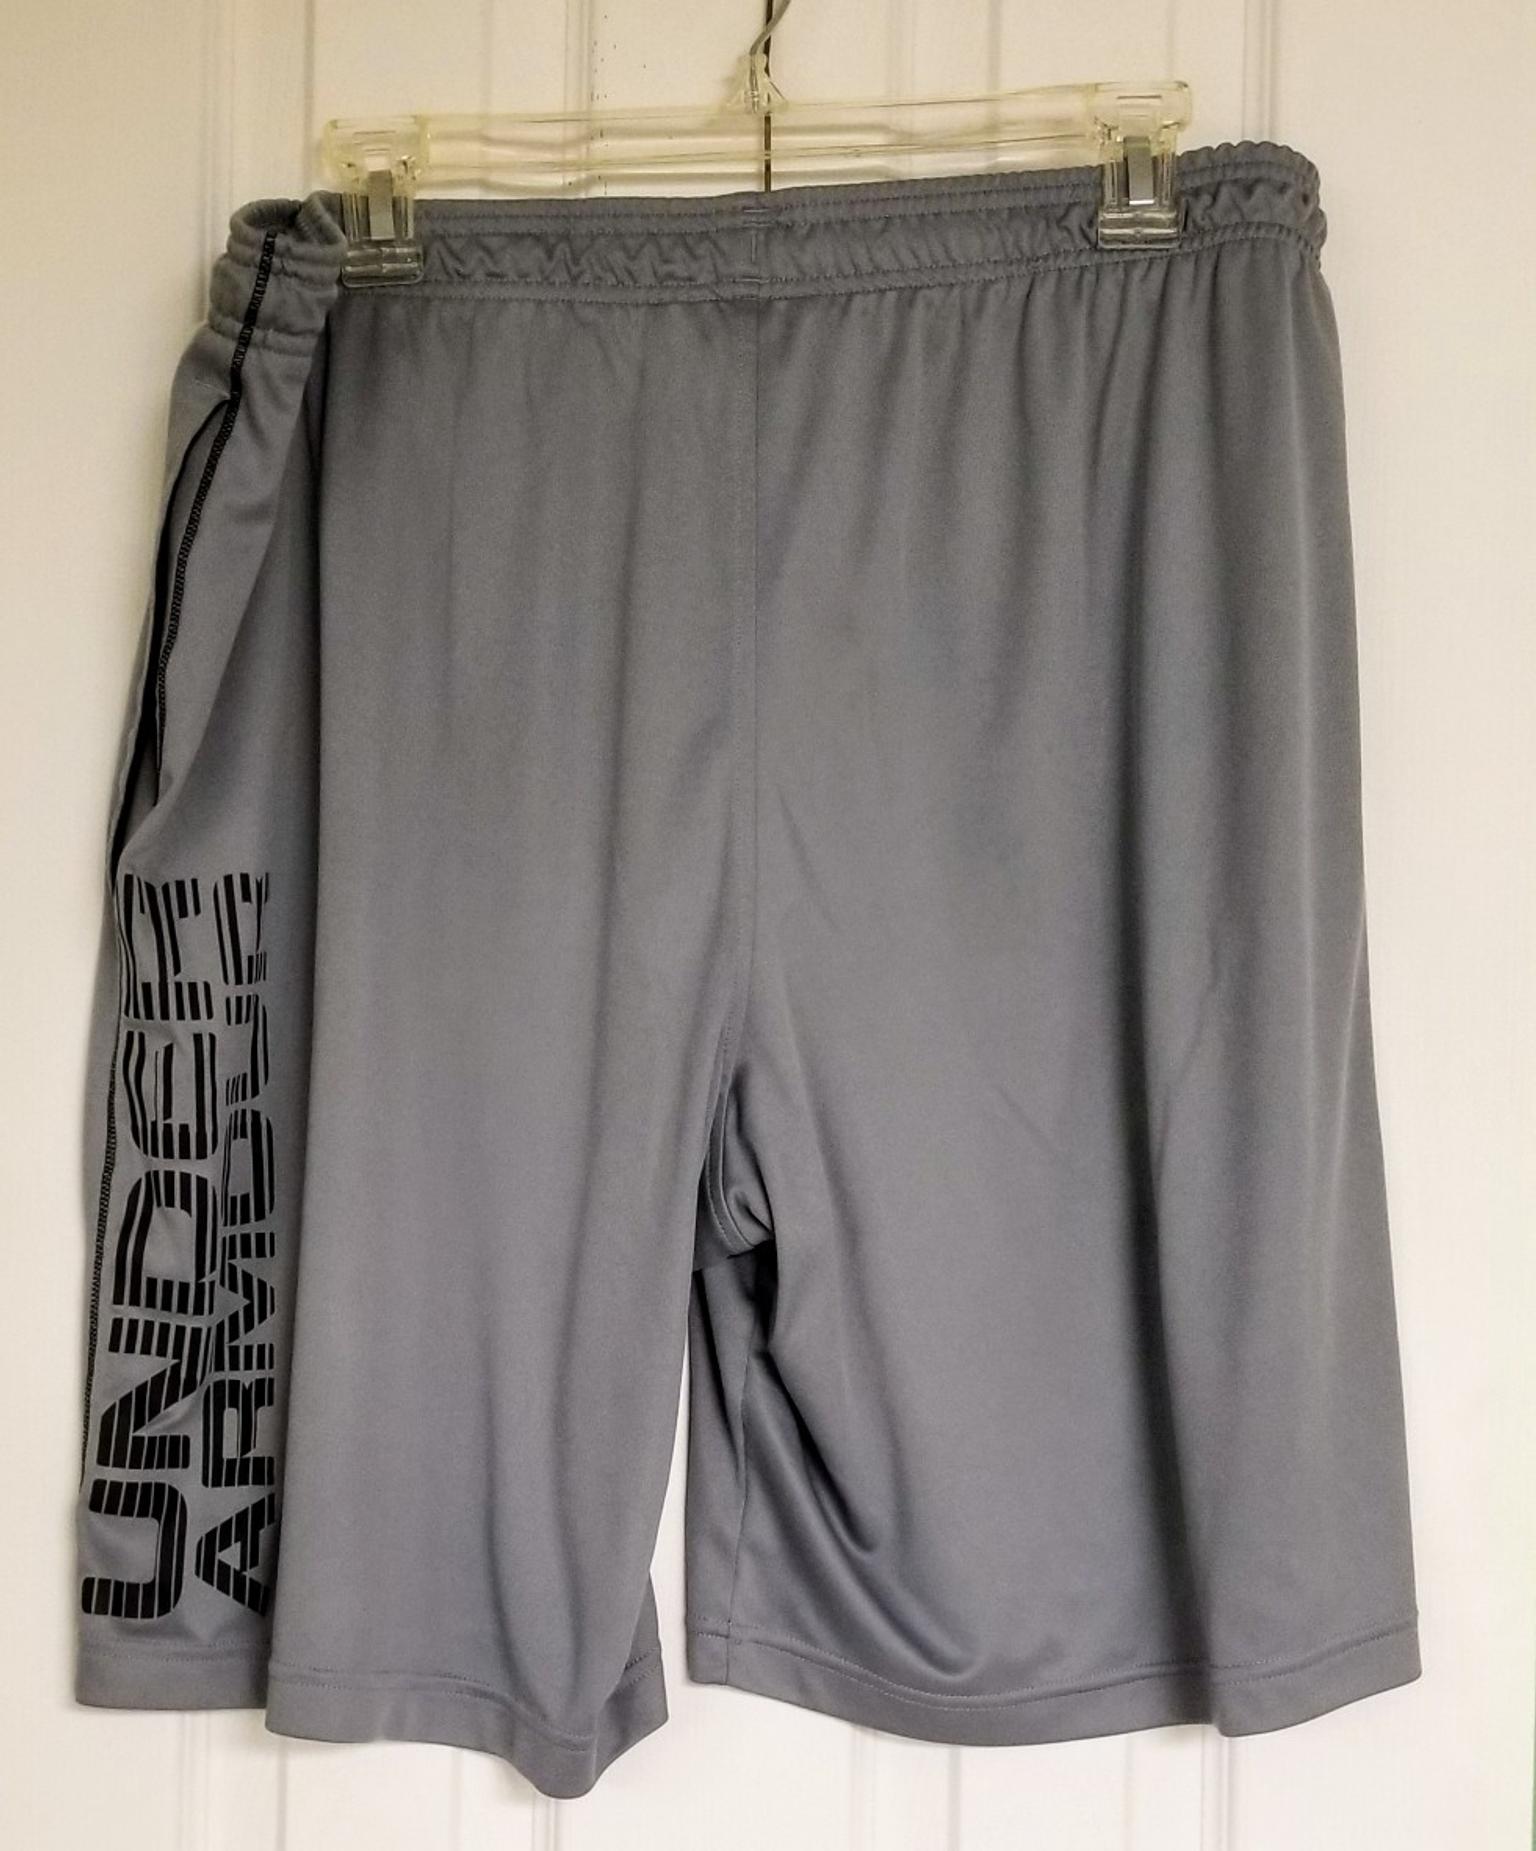 Mens Grey XXL Under Armour Shorts in 